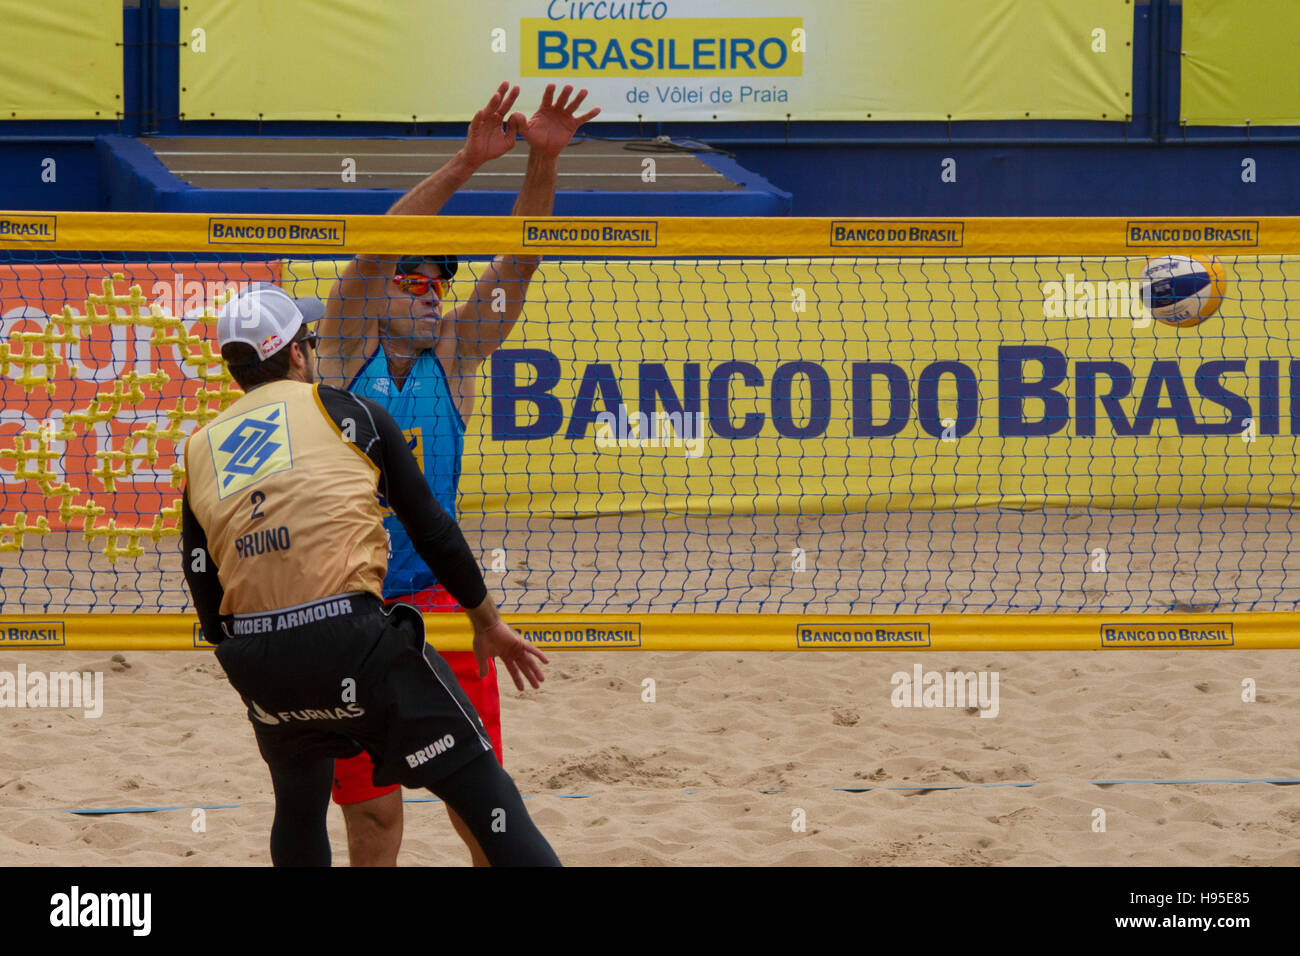 Curitiba, Brazil. 19th Nov, 2016. finals. Between 16 and 20 November, takes place the 4th stage of the Brazilian Circuit of Beach Volleyball in Curitiba PR. © Guilherme Artigas/FotoArena/Alamy Live News Stock Photo